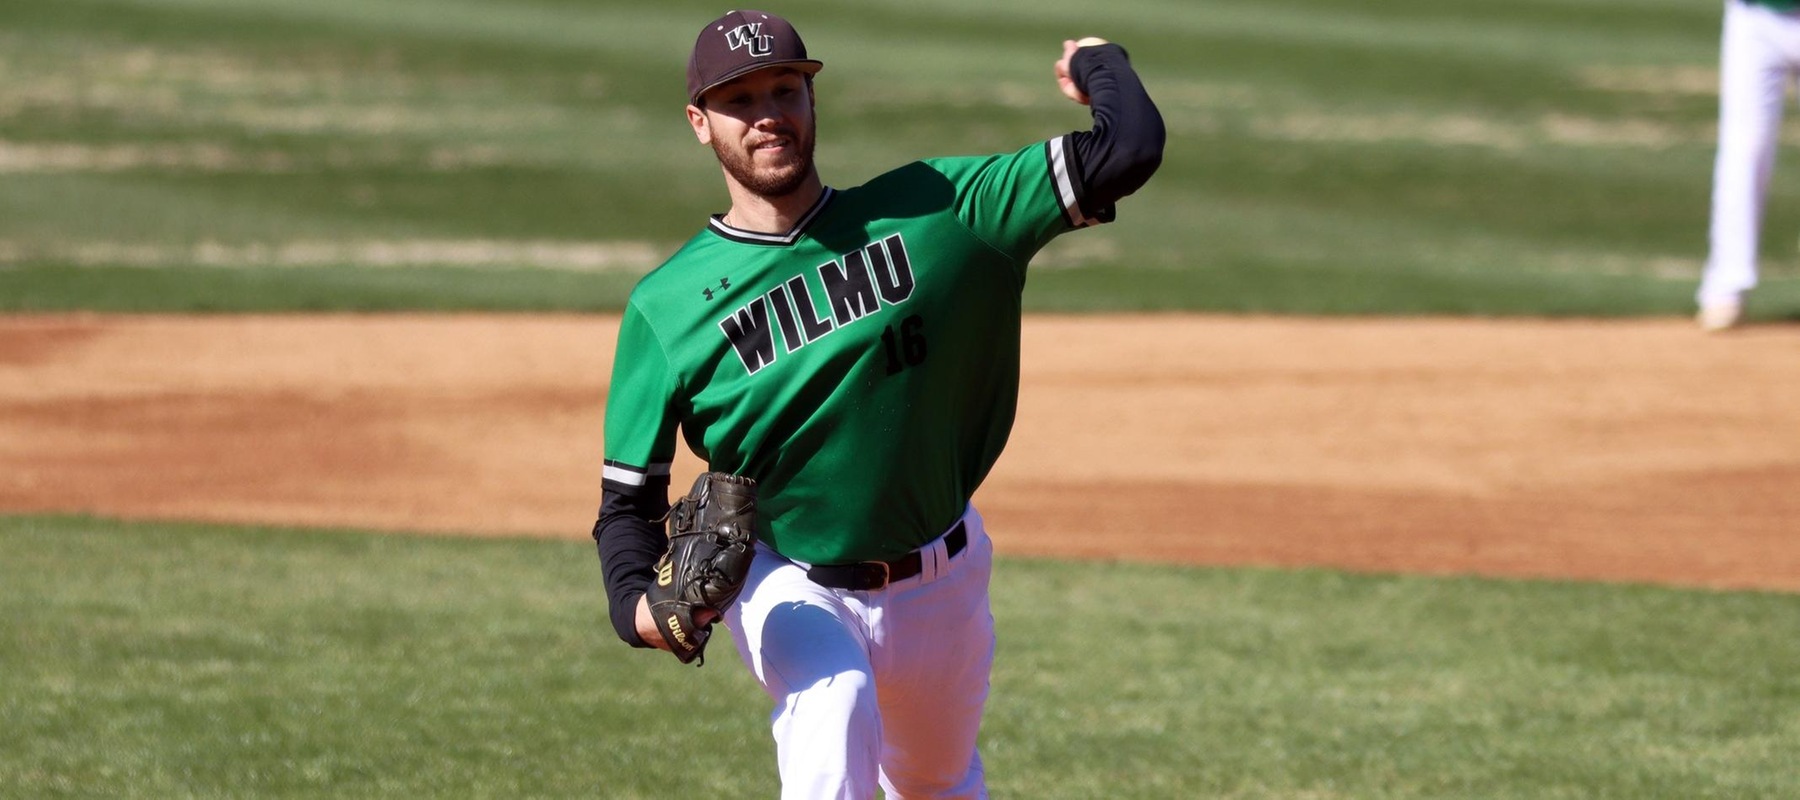 File photo of Matt Boyko who went 6 IP and only allowed two runs on four hits while striking out 5 in the win over Goldey-BEacom. Copyright 2023; Wilmington University. All rights reserved. Photo by Dan Lauletta. March 30, 2023 vs. Bridgeport.